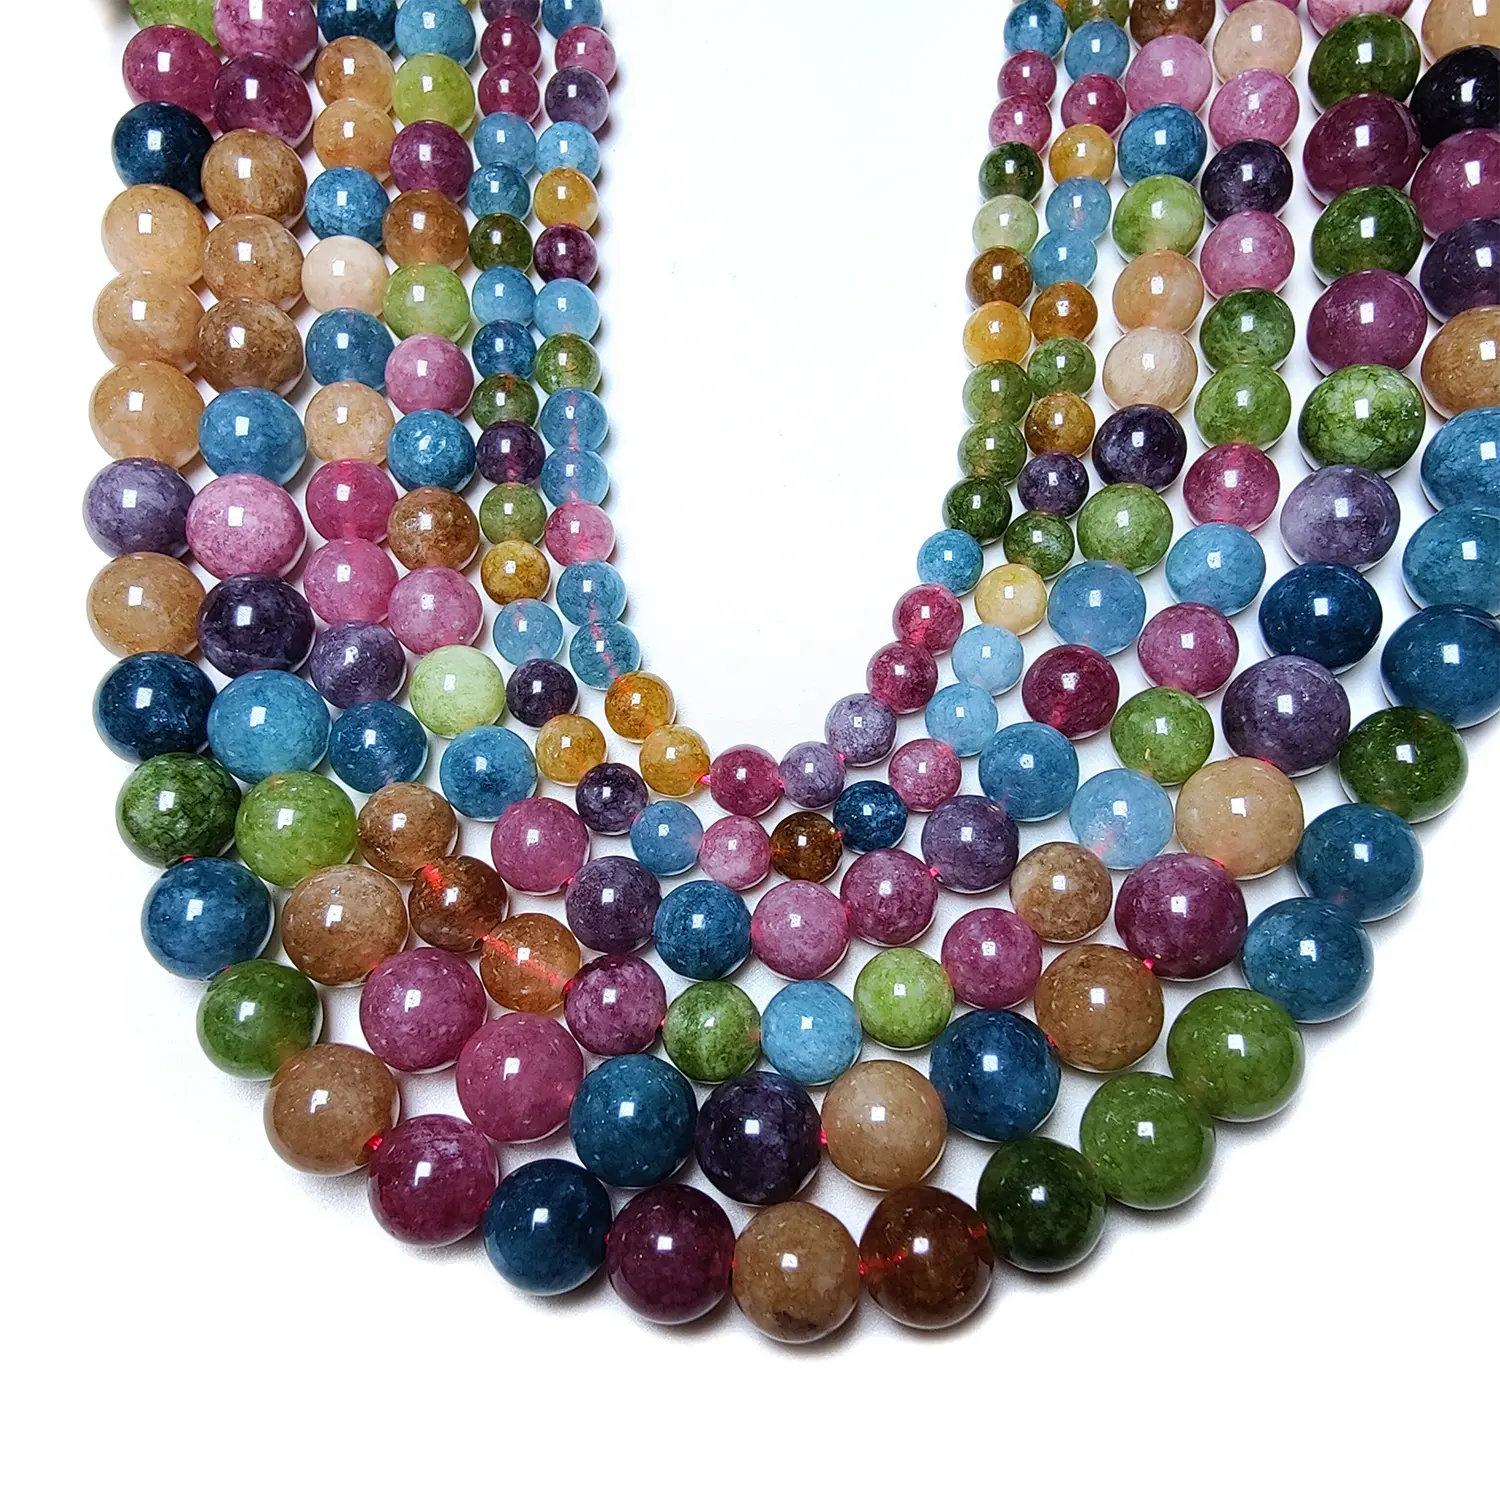 Colorful Tourmaline Stone Beads Natural Polished Round Smooth Gemstone Beads for Jewelry Making